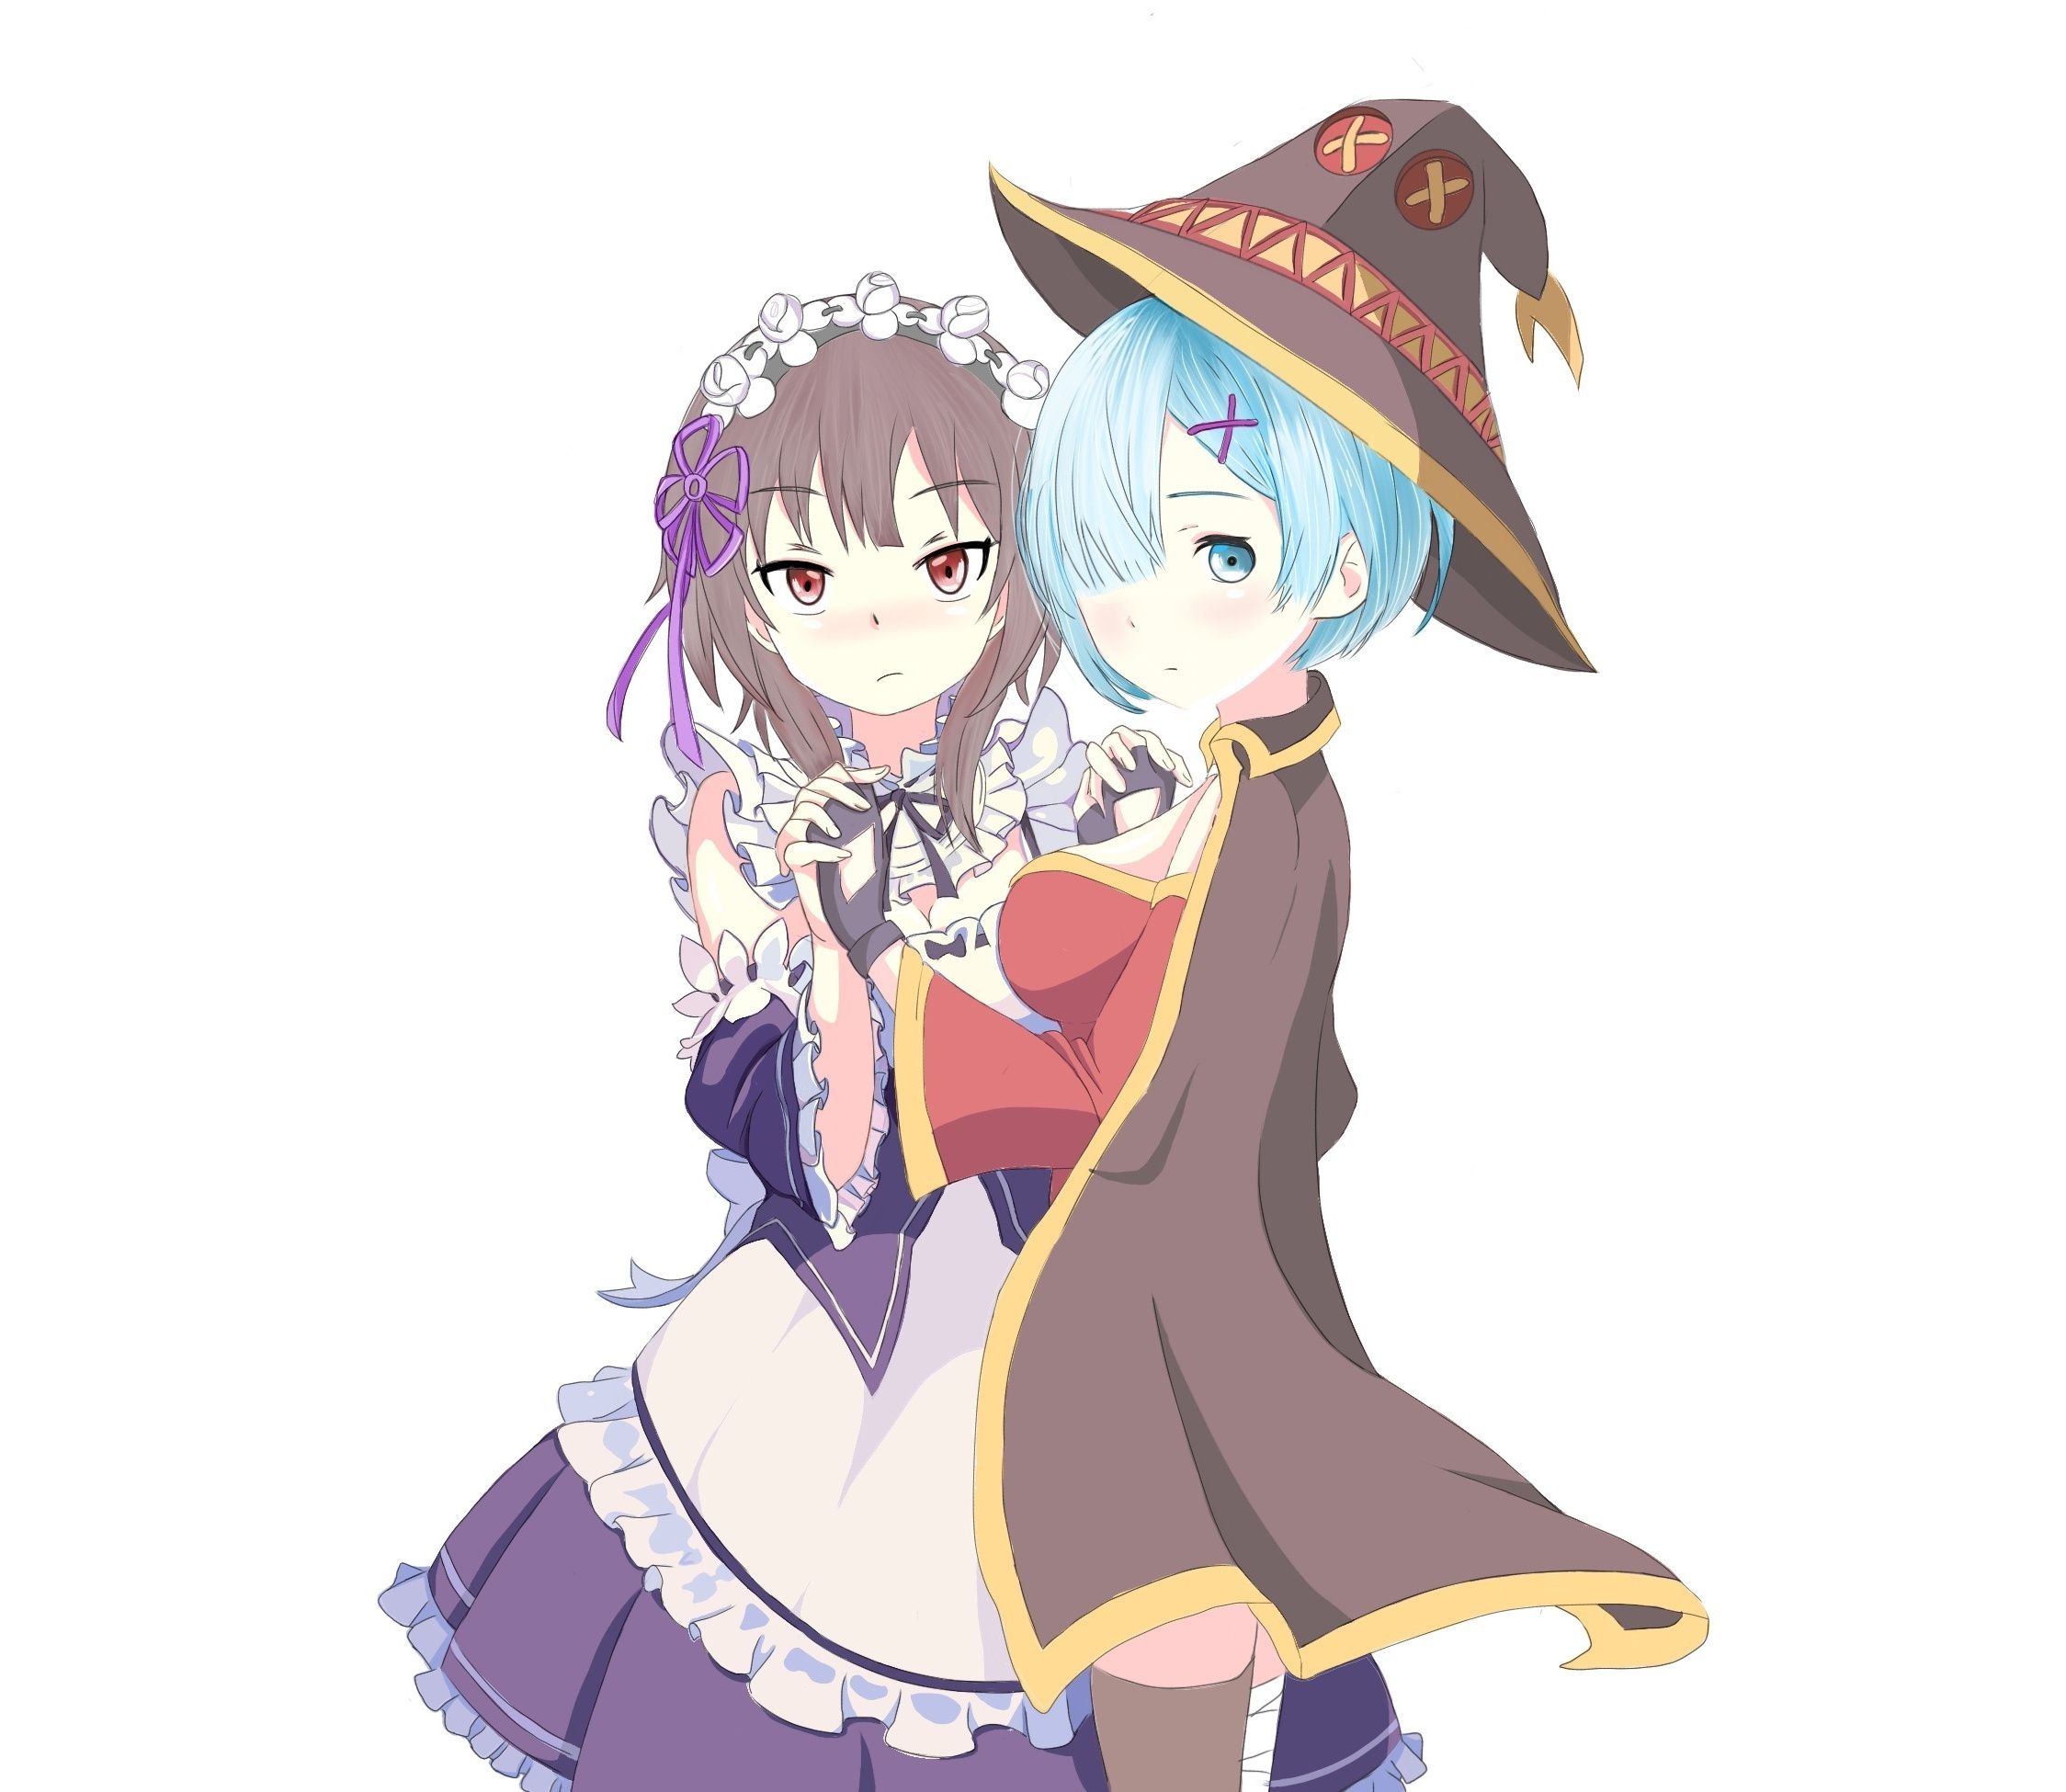 Megumin And Rem, Anime Girls, Crossover, Wallpaper